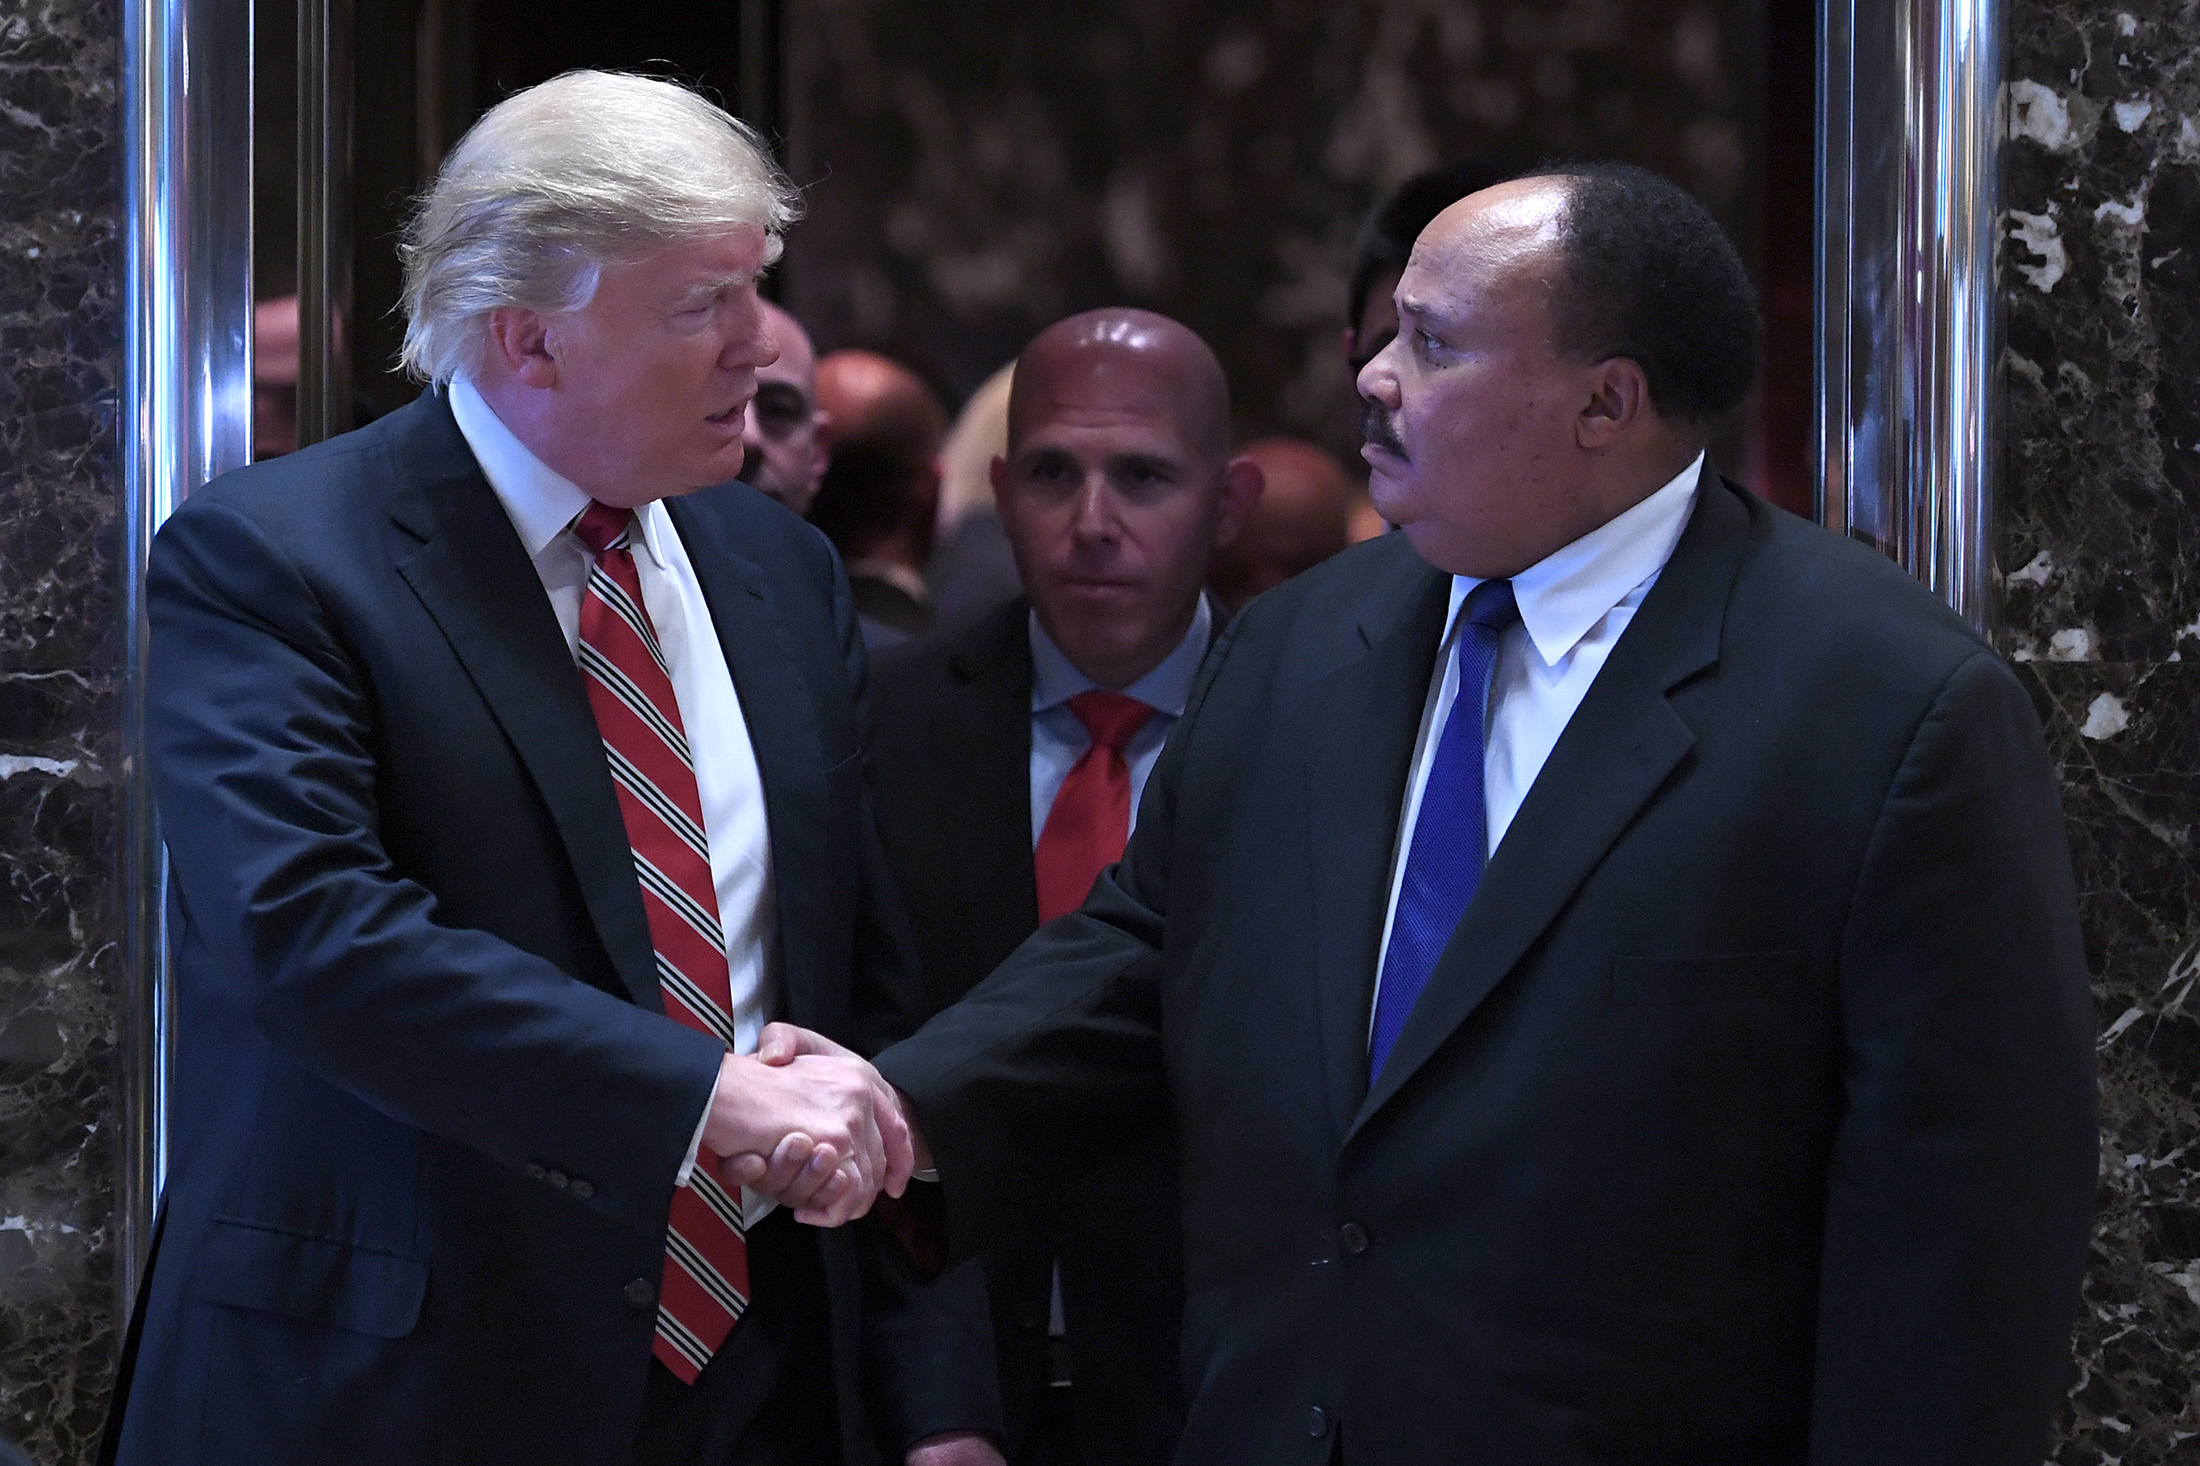 Trump shakes hands with Martin Luther King III.
